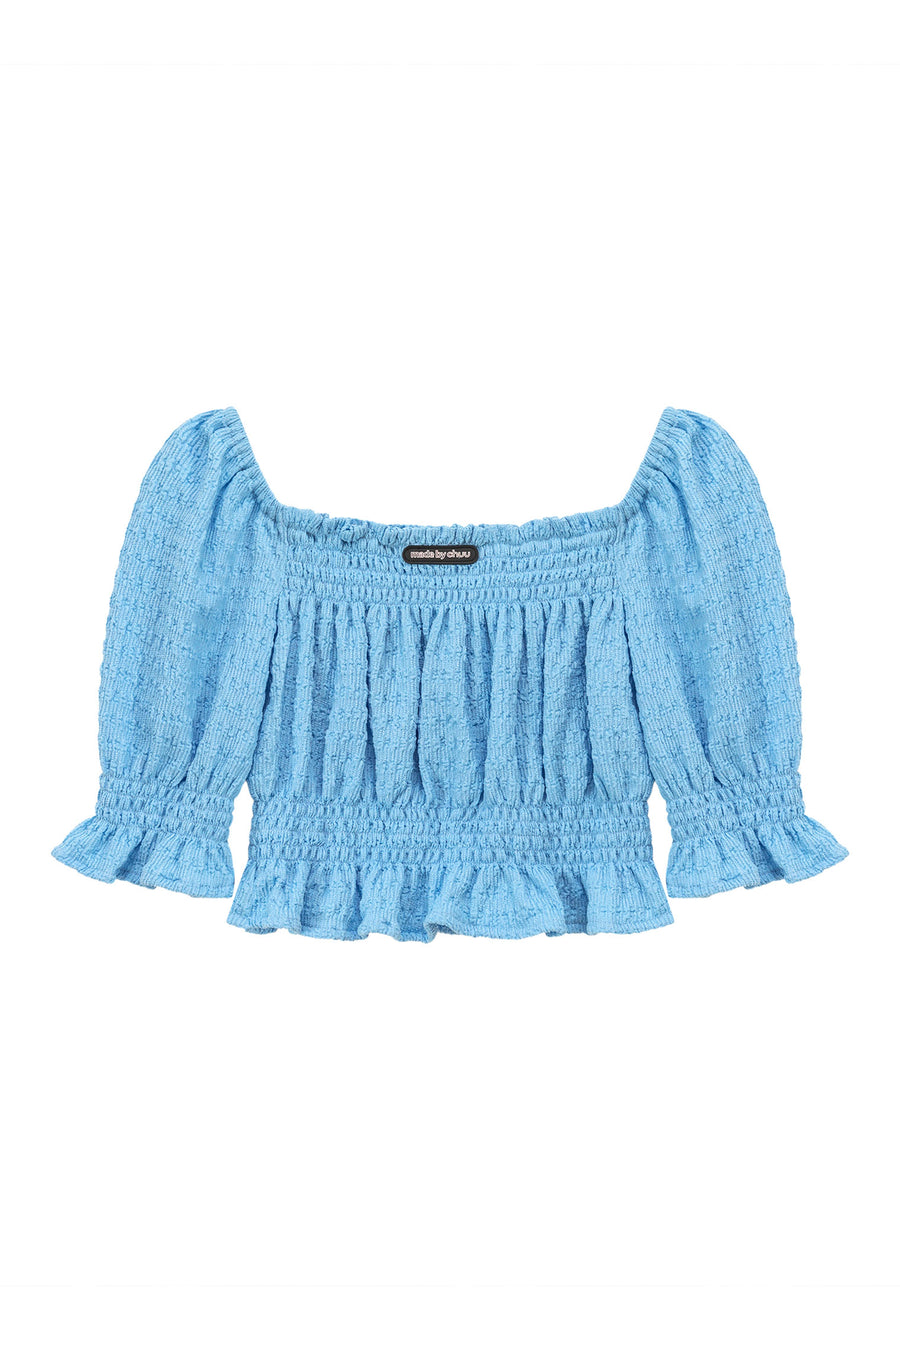 CHUU Off The Shoulder Puffed Sleeves Top